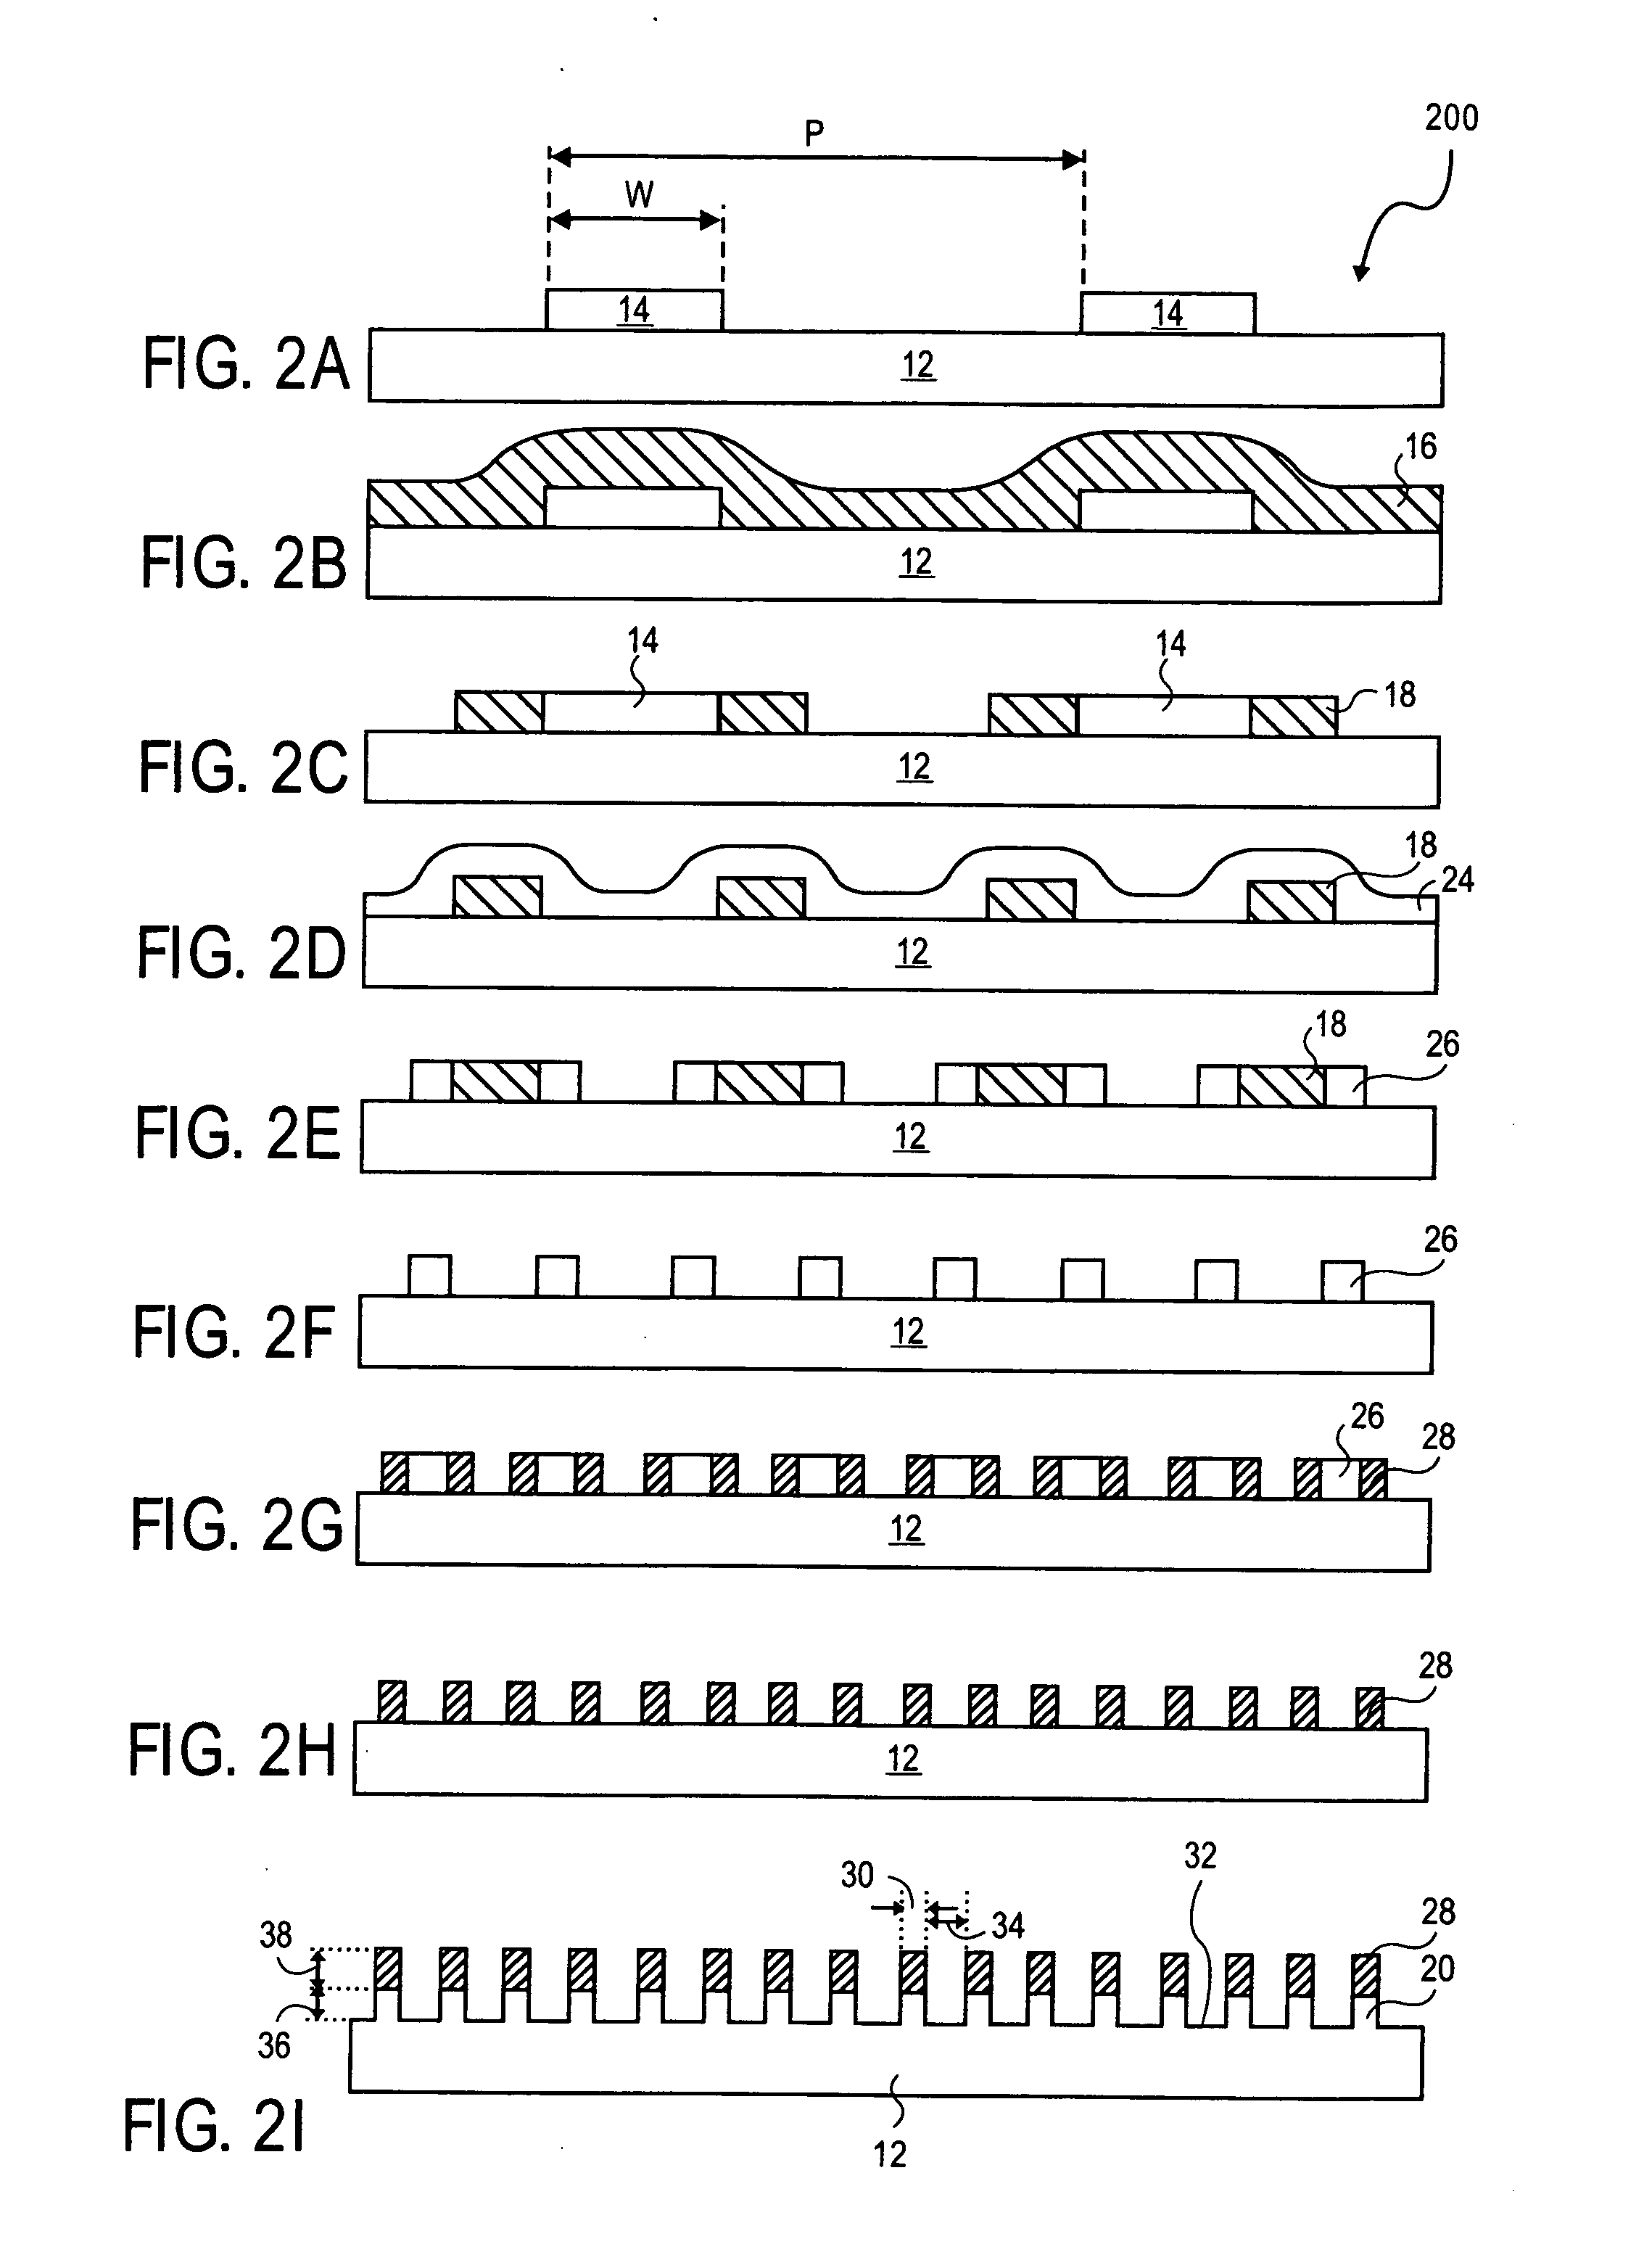 Quantum wire gate device and method of making same